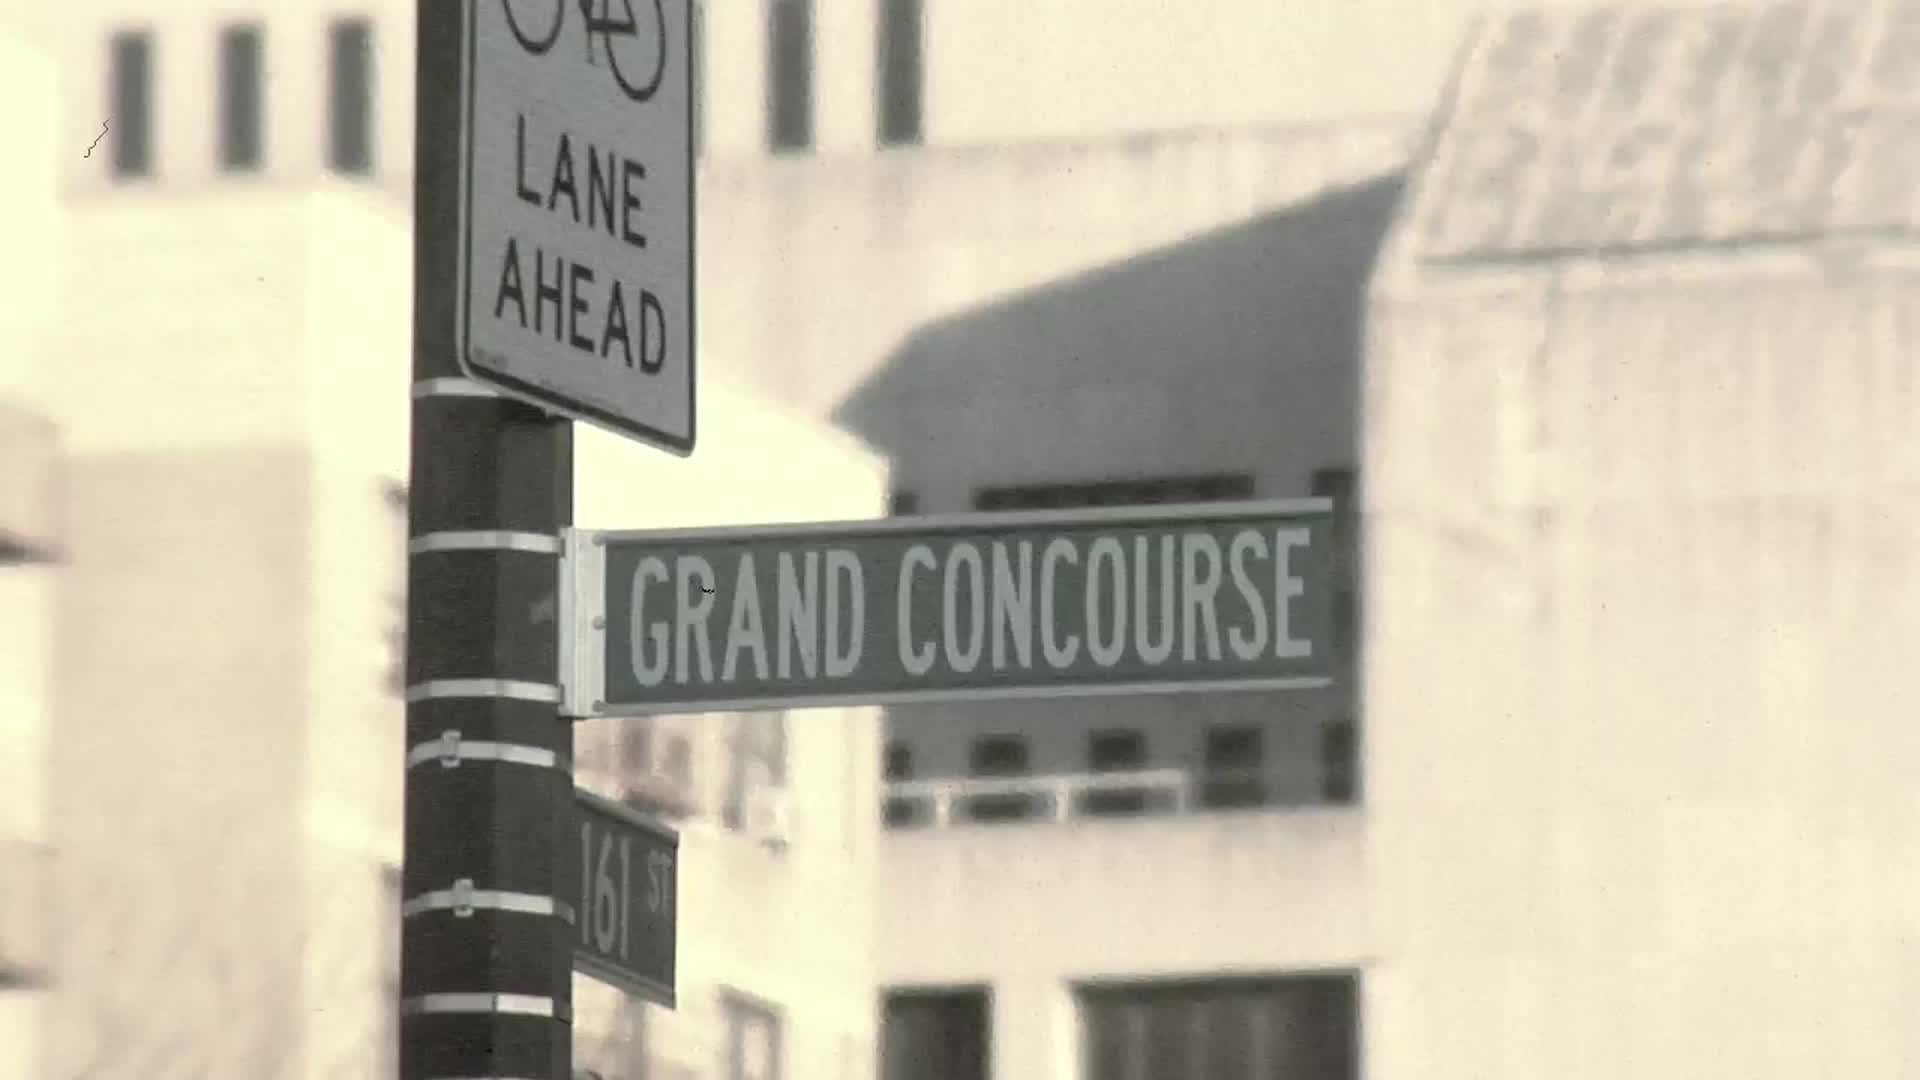 Grand Concourse street sign close-up old vintage look in the Bronx